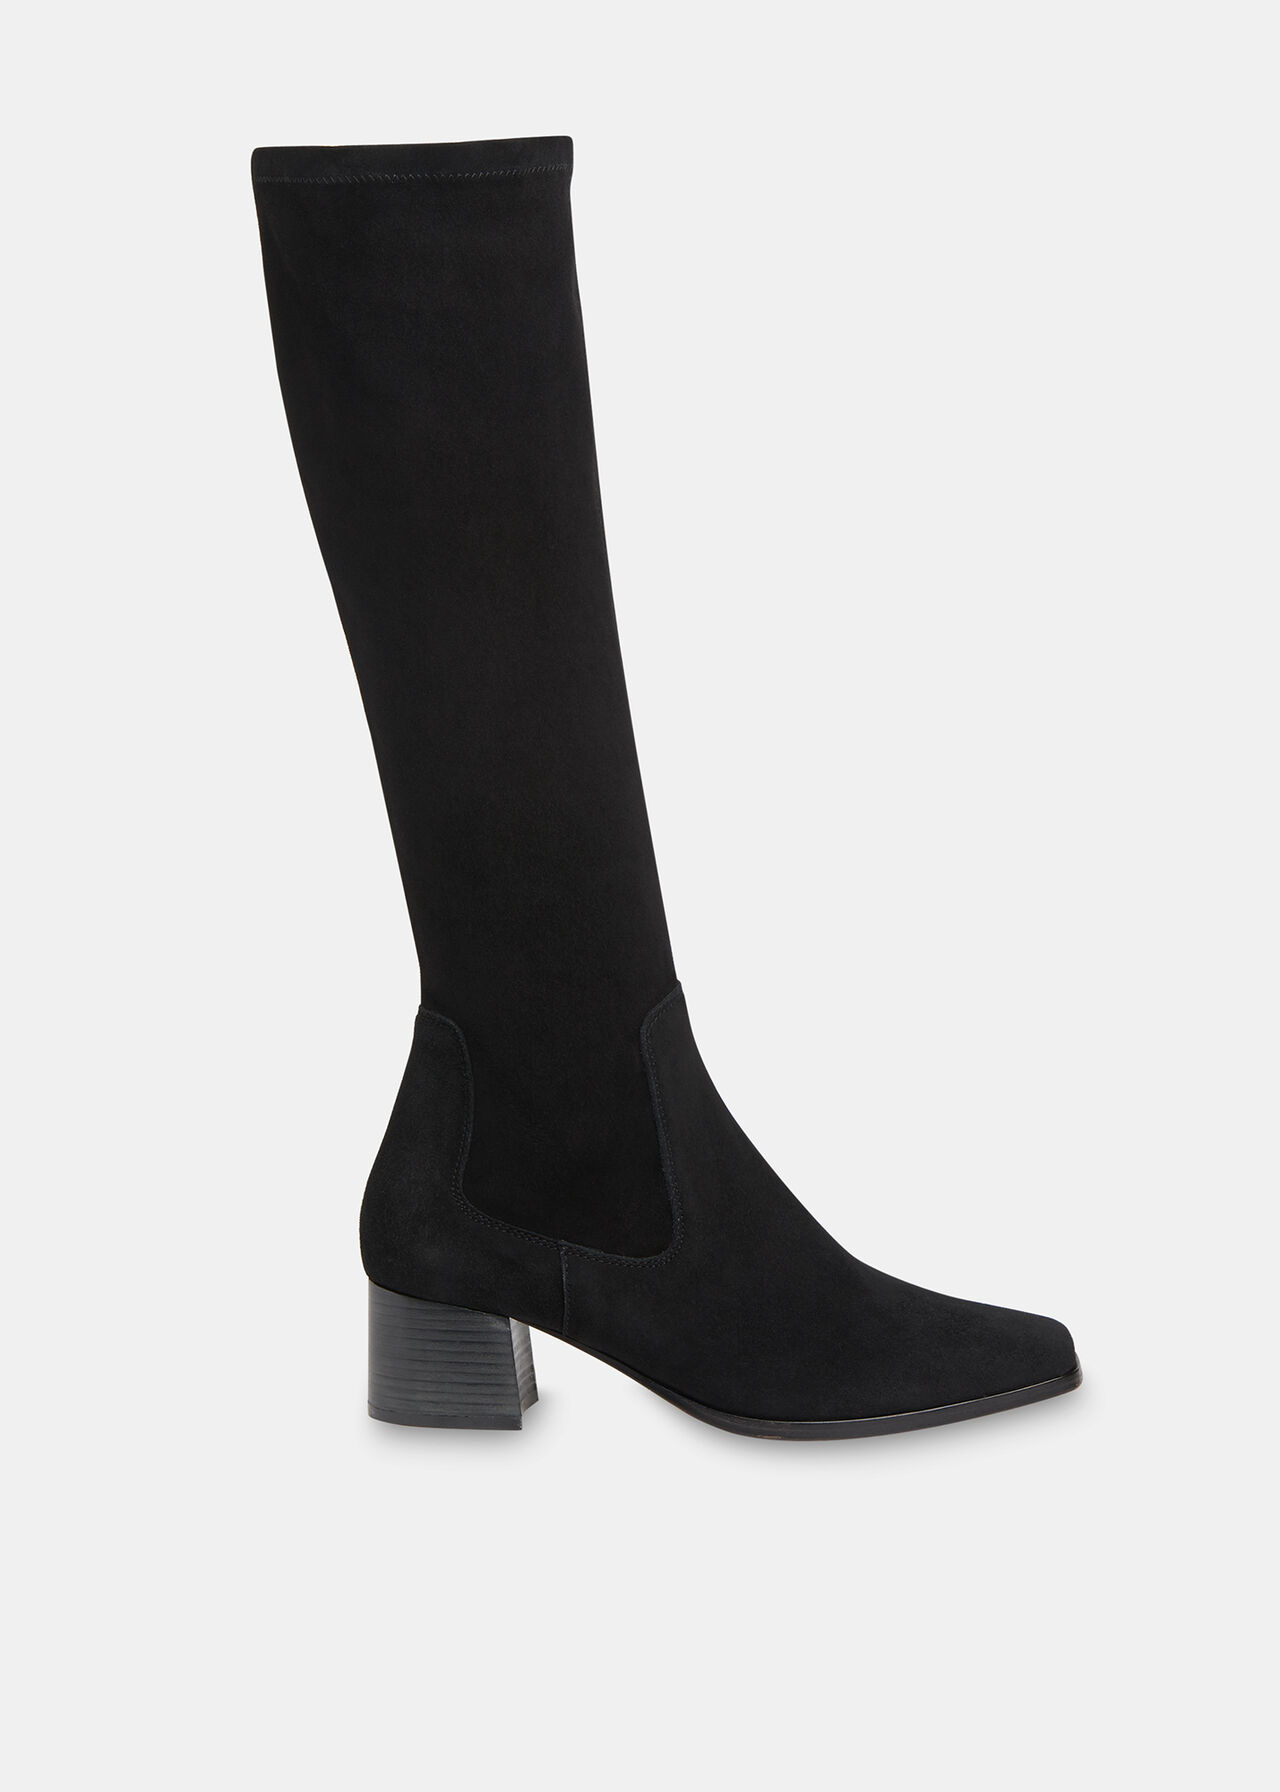 Black Blaire Stretch Knee High Boot | WHISTLES | Whistles UK